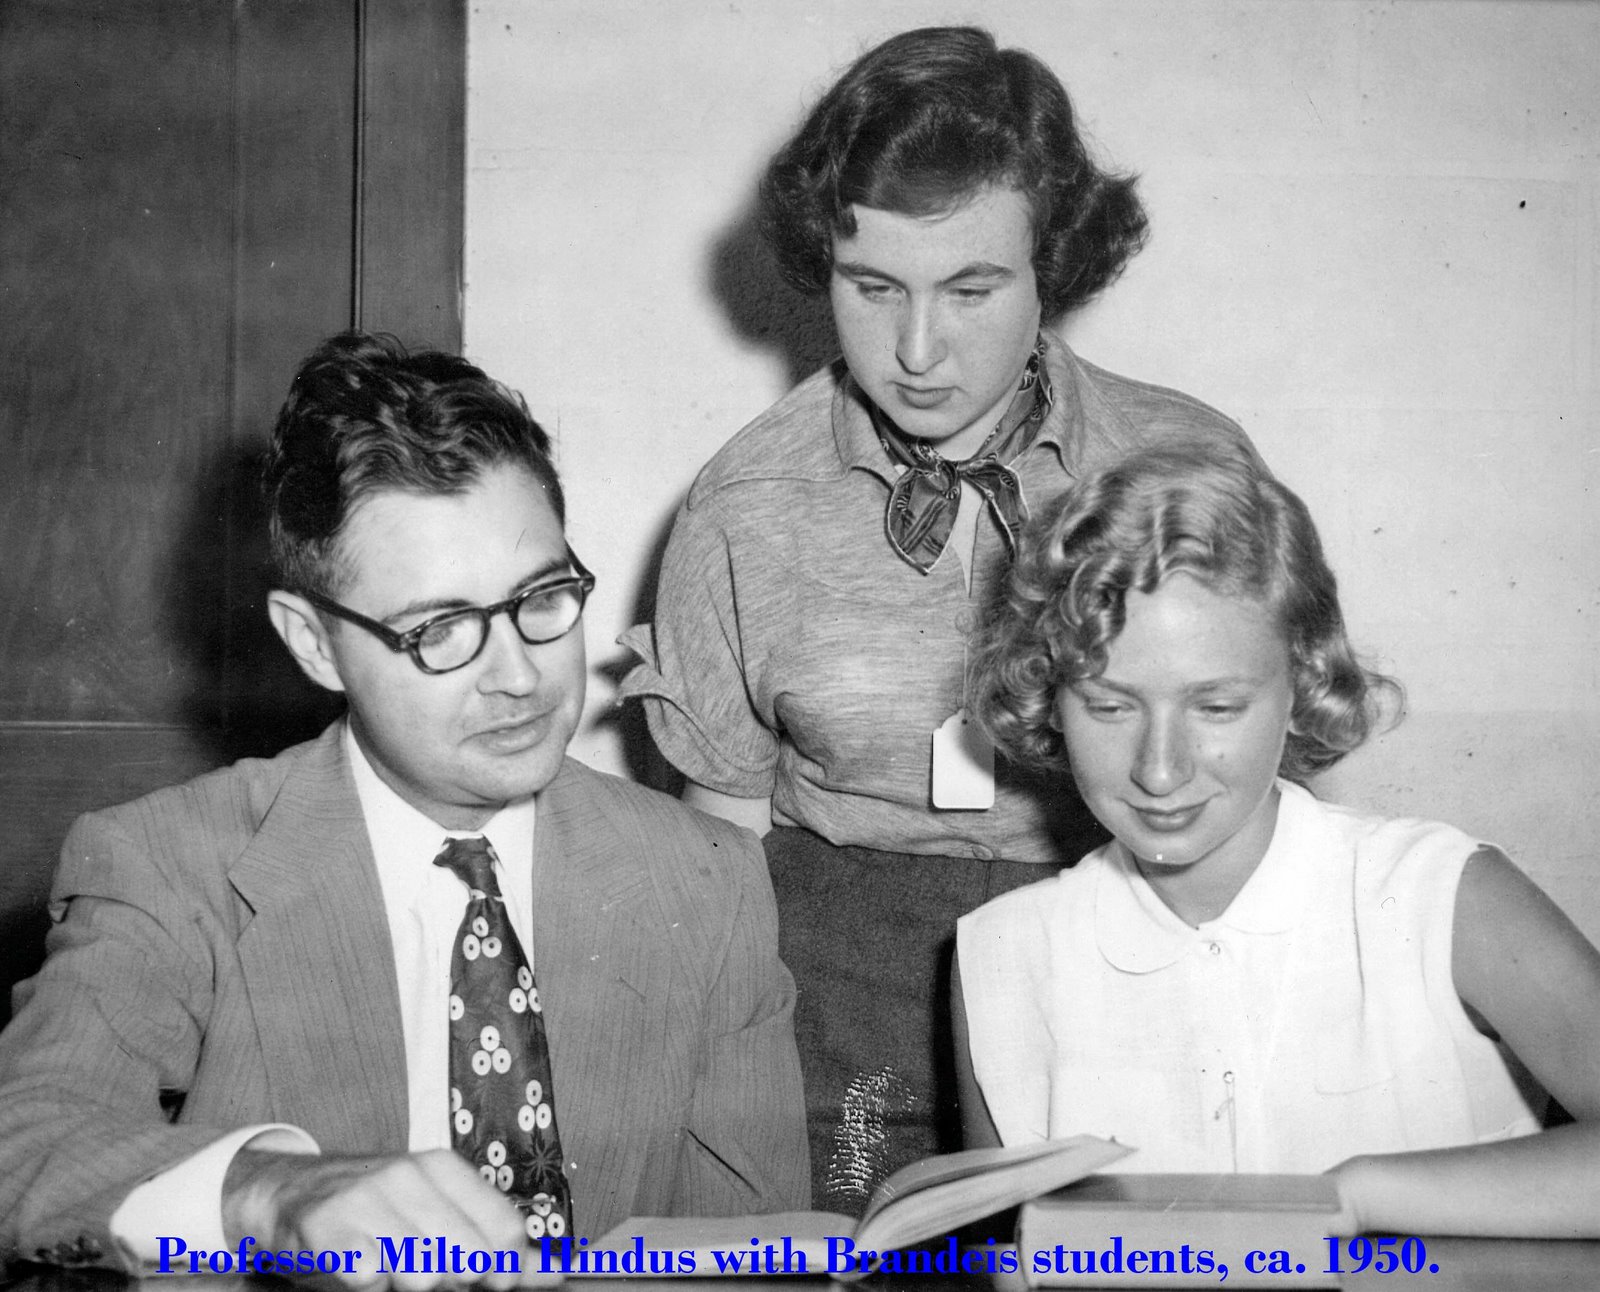 Black and white photograph of Professor Milton Hindus with Brandeis students circa 1950